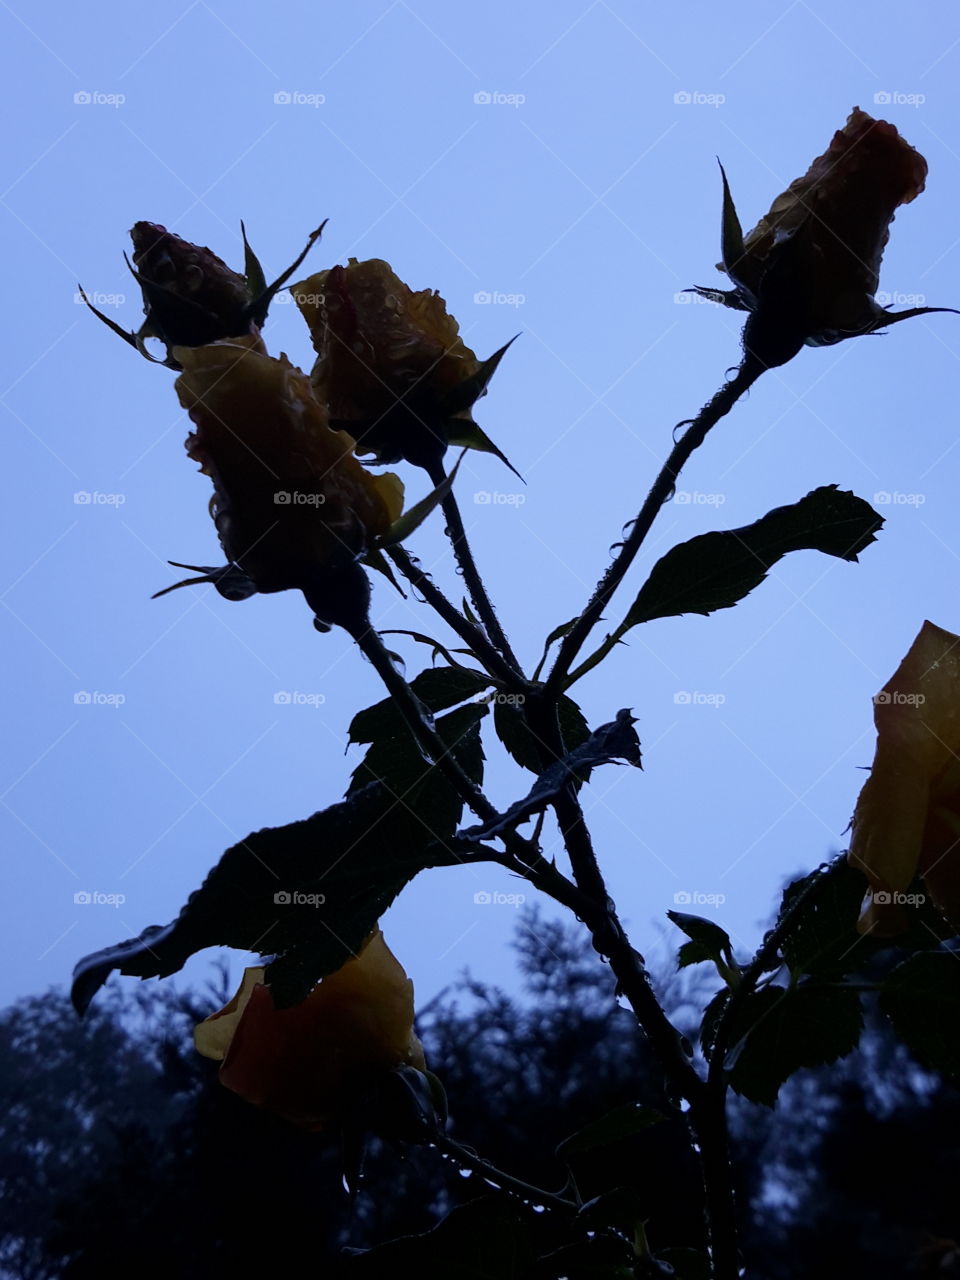 Autumn roses in the drops.